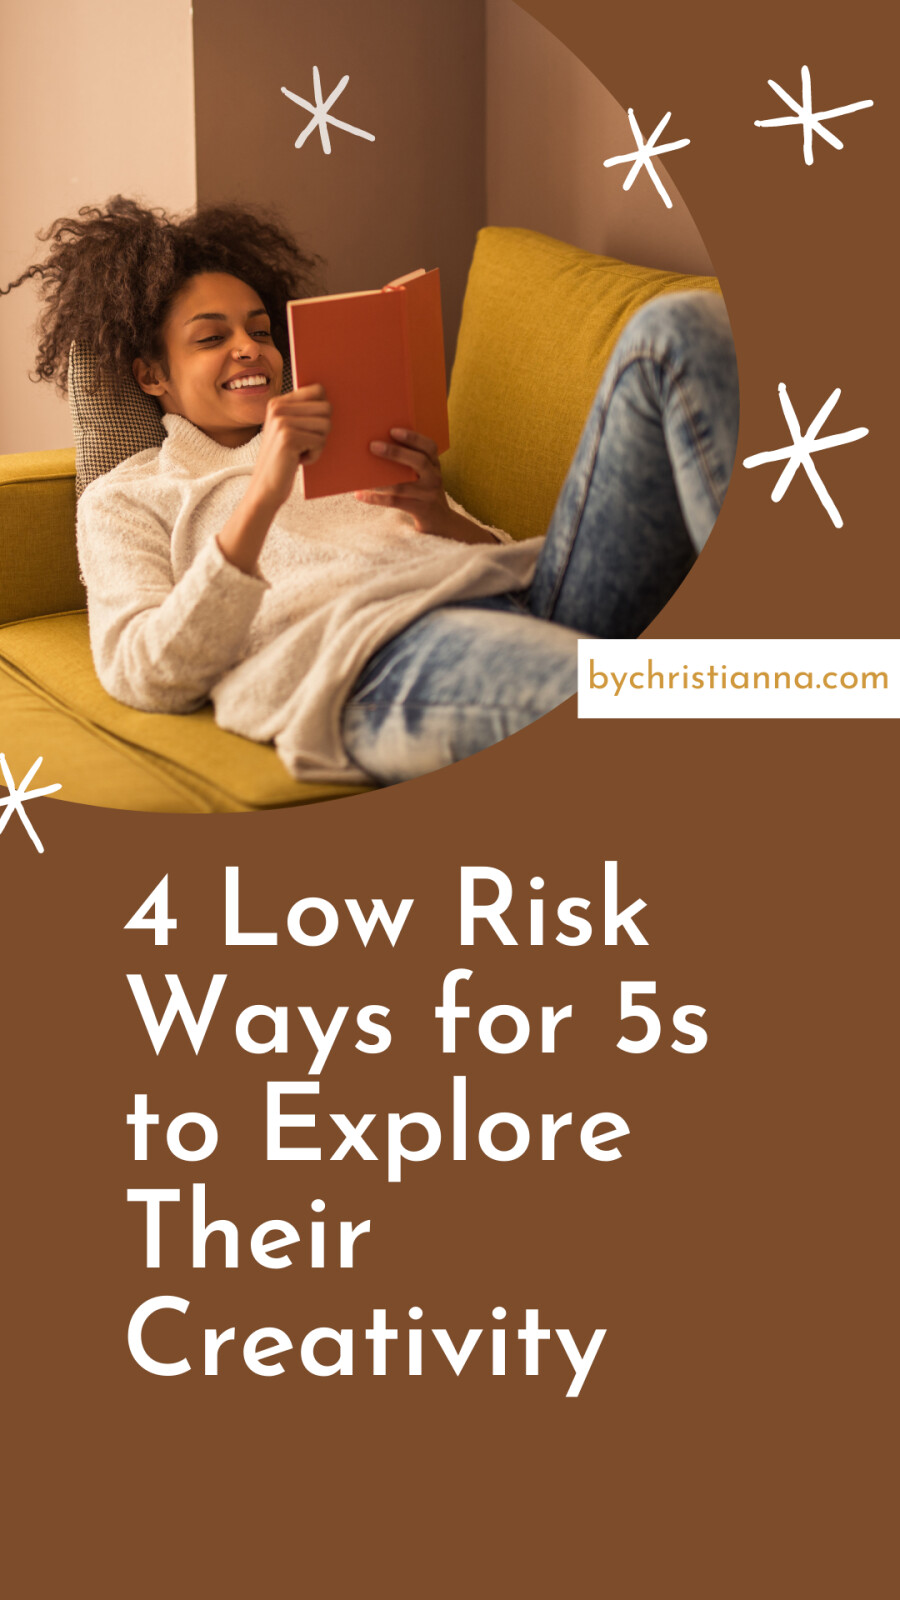 4 Low Risk Ways for 5s to Explore Their Creativity